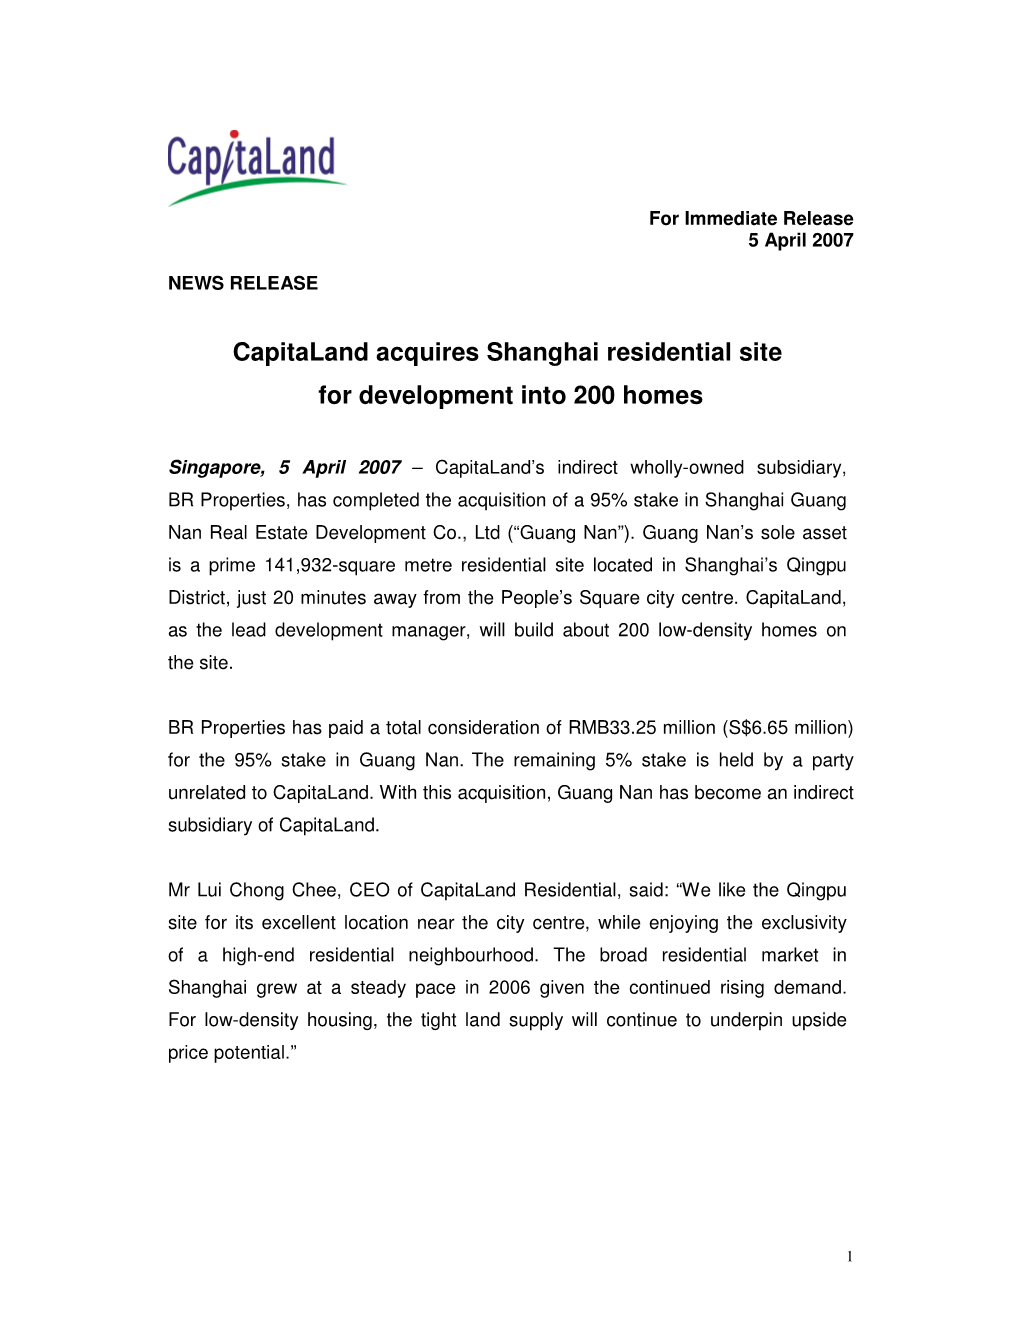 Capitaland Acquires Shanghai Residential Site for Development Into 200 Homes